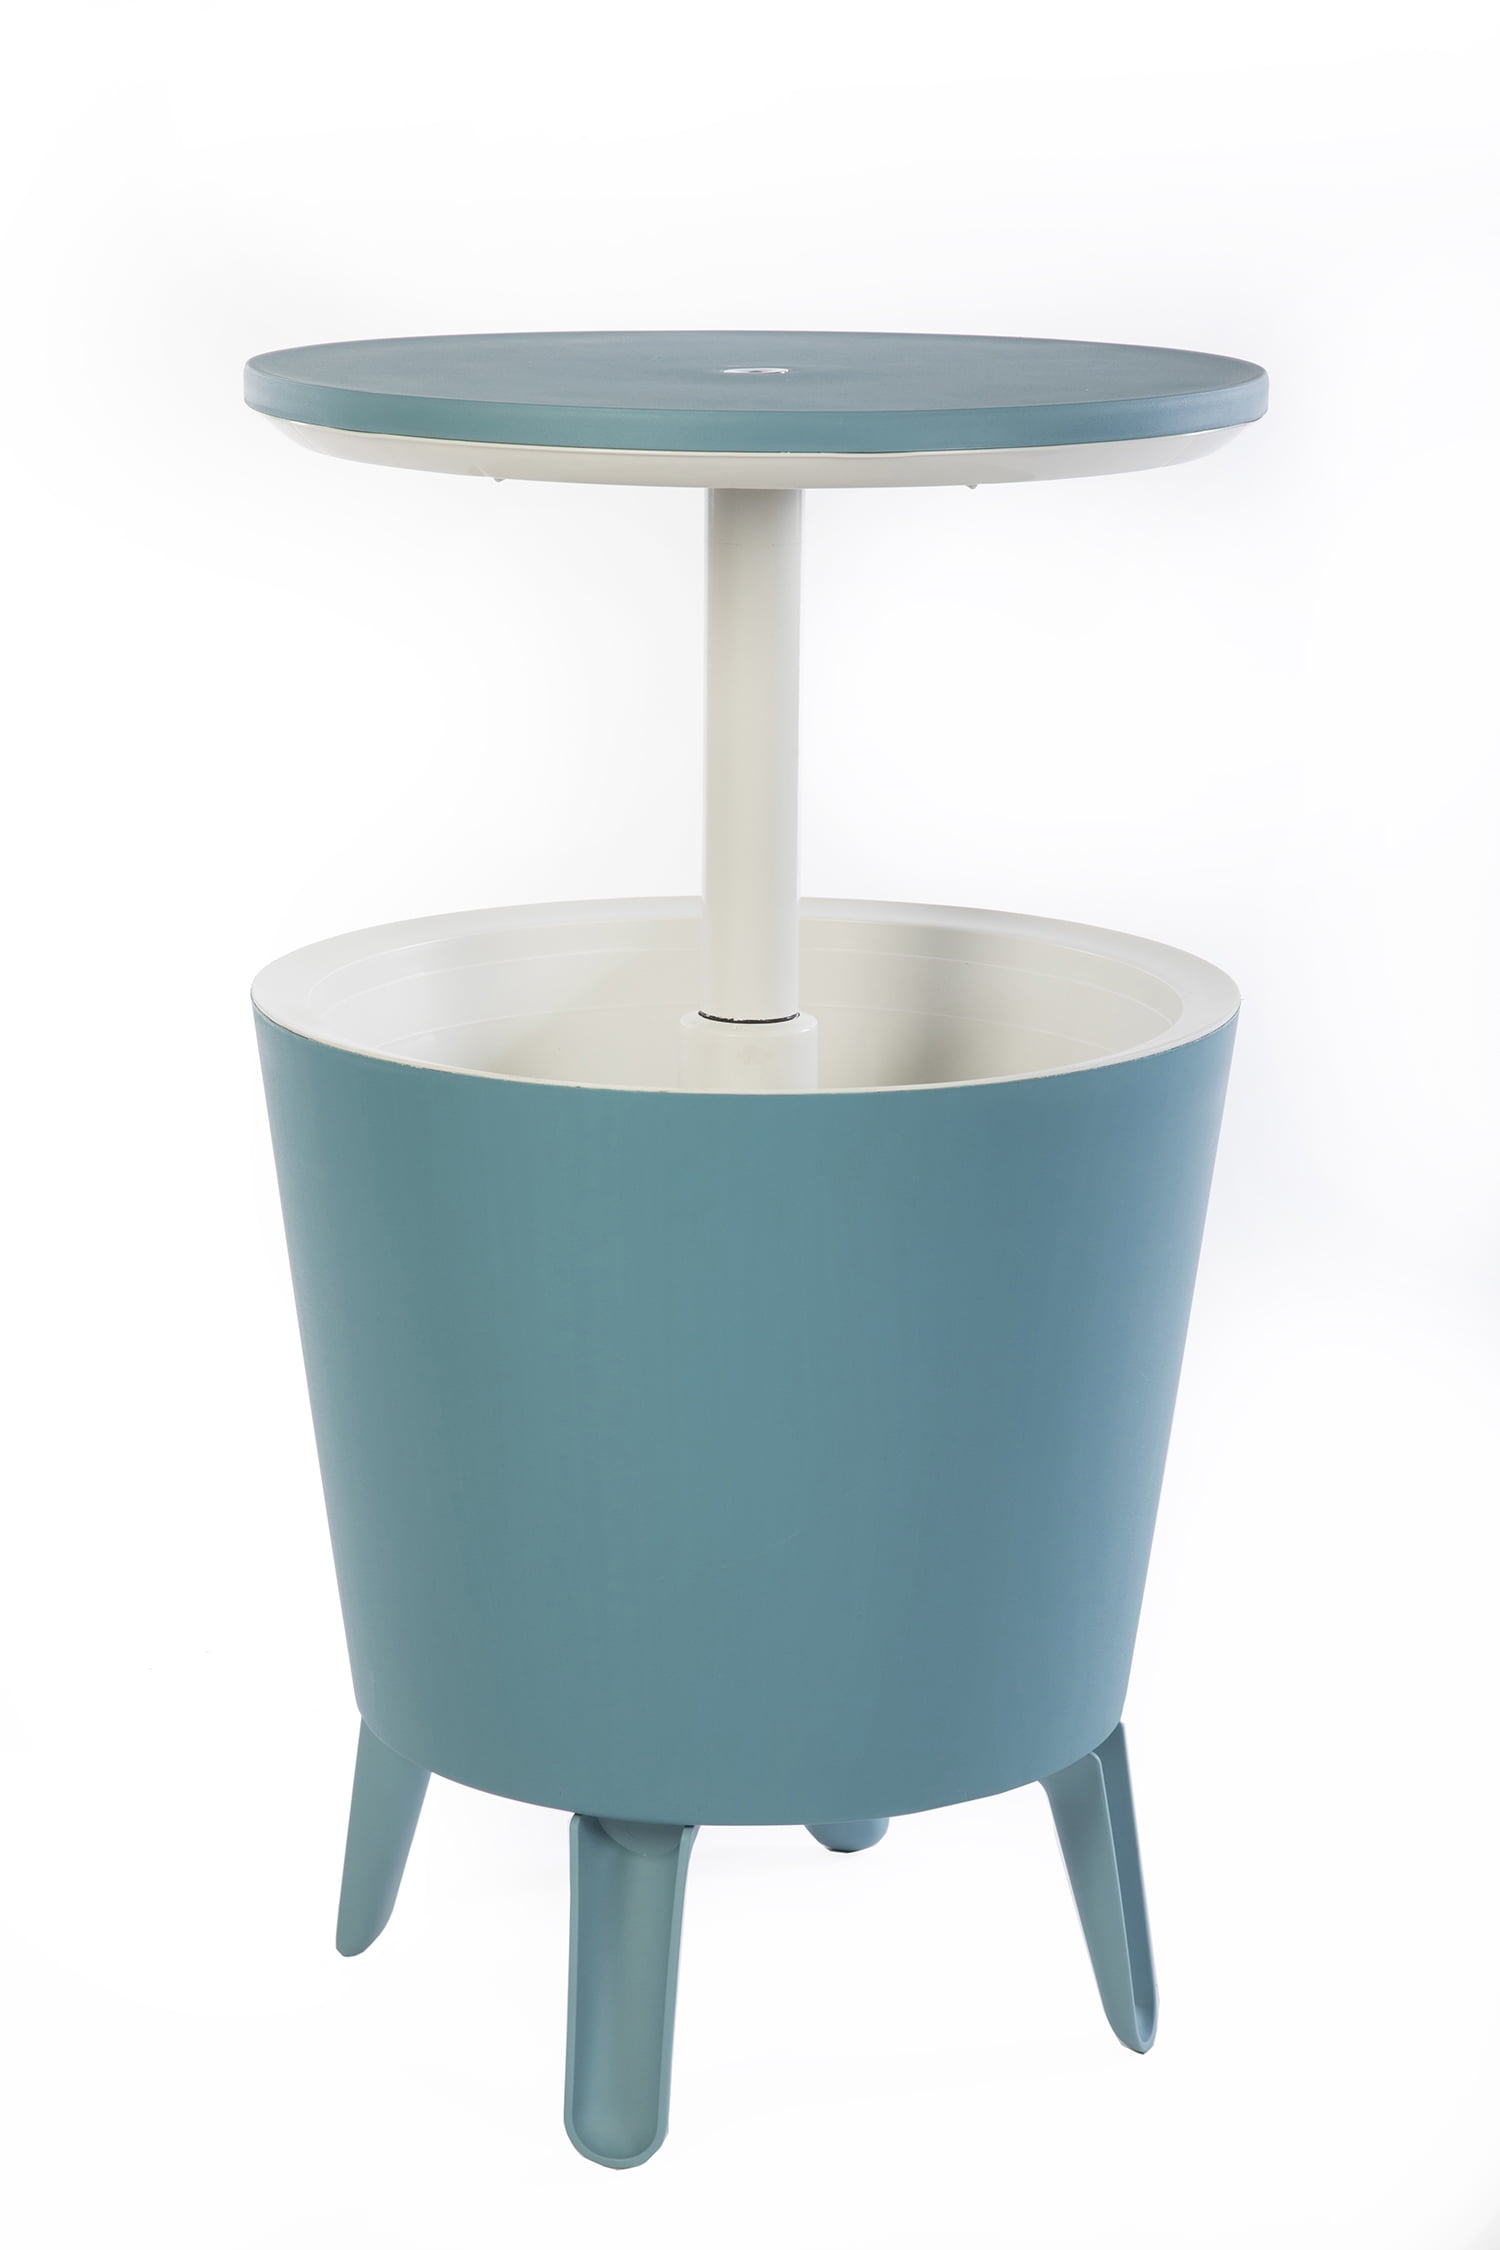 15+ Outdoor Cooler Side Table